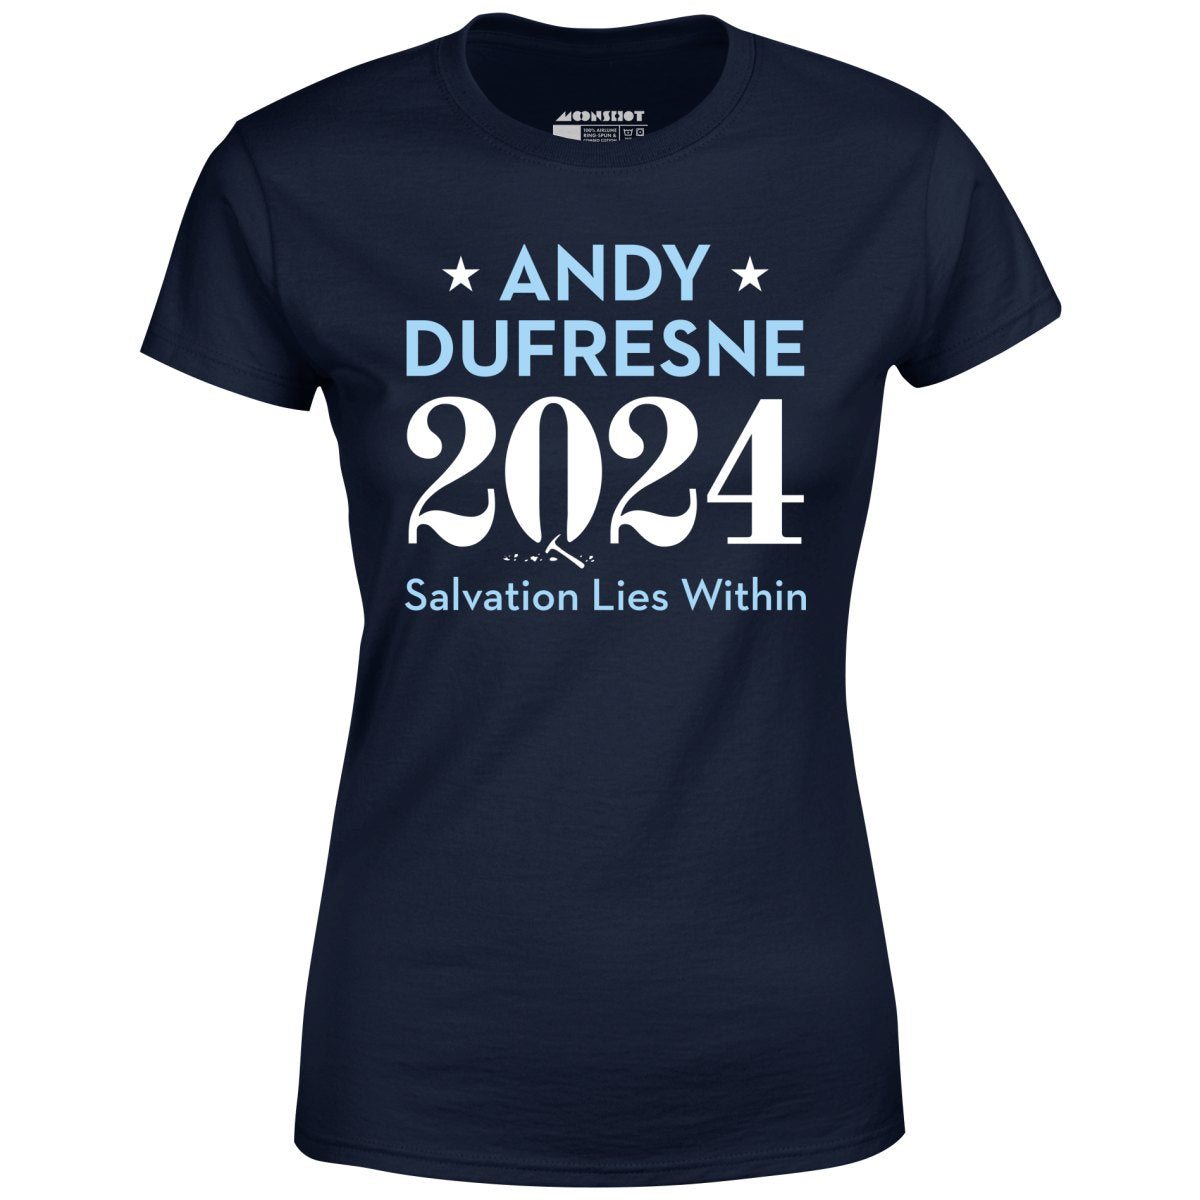 Andy Dufresne 2024 - Phony Campaign - Women's T-Shirt